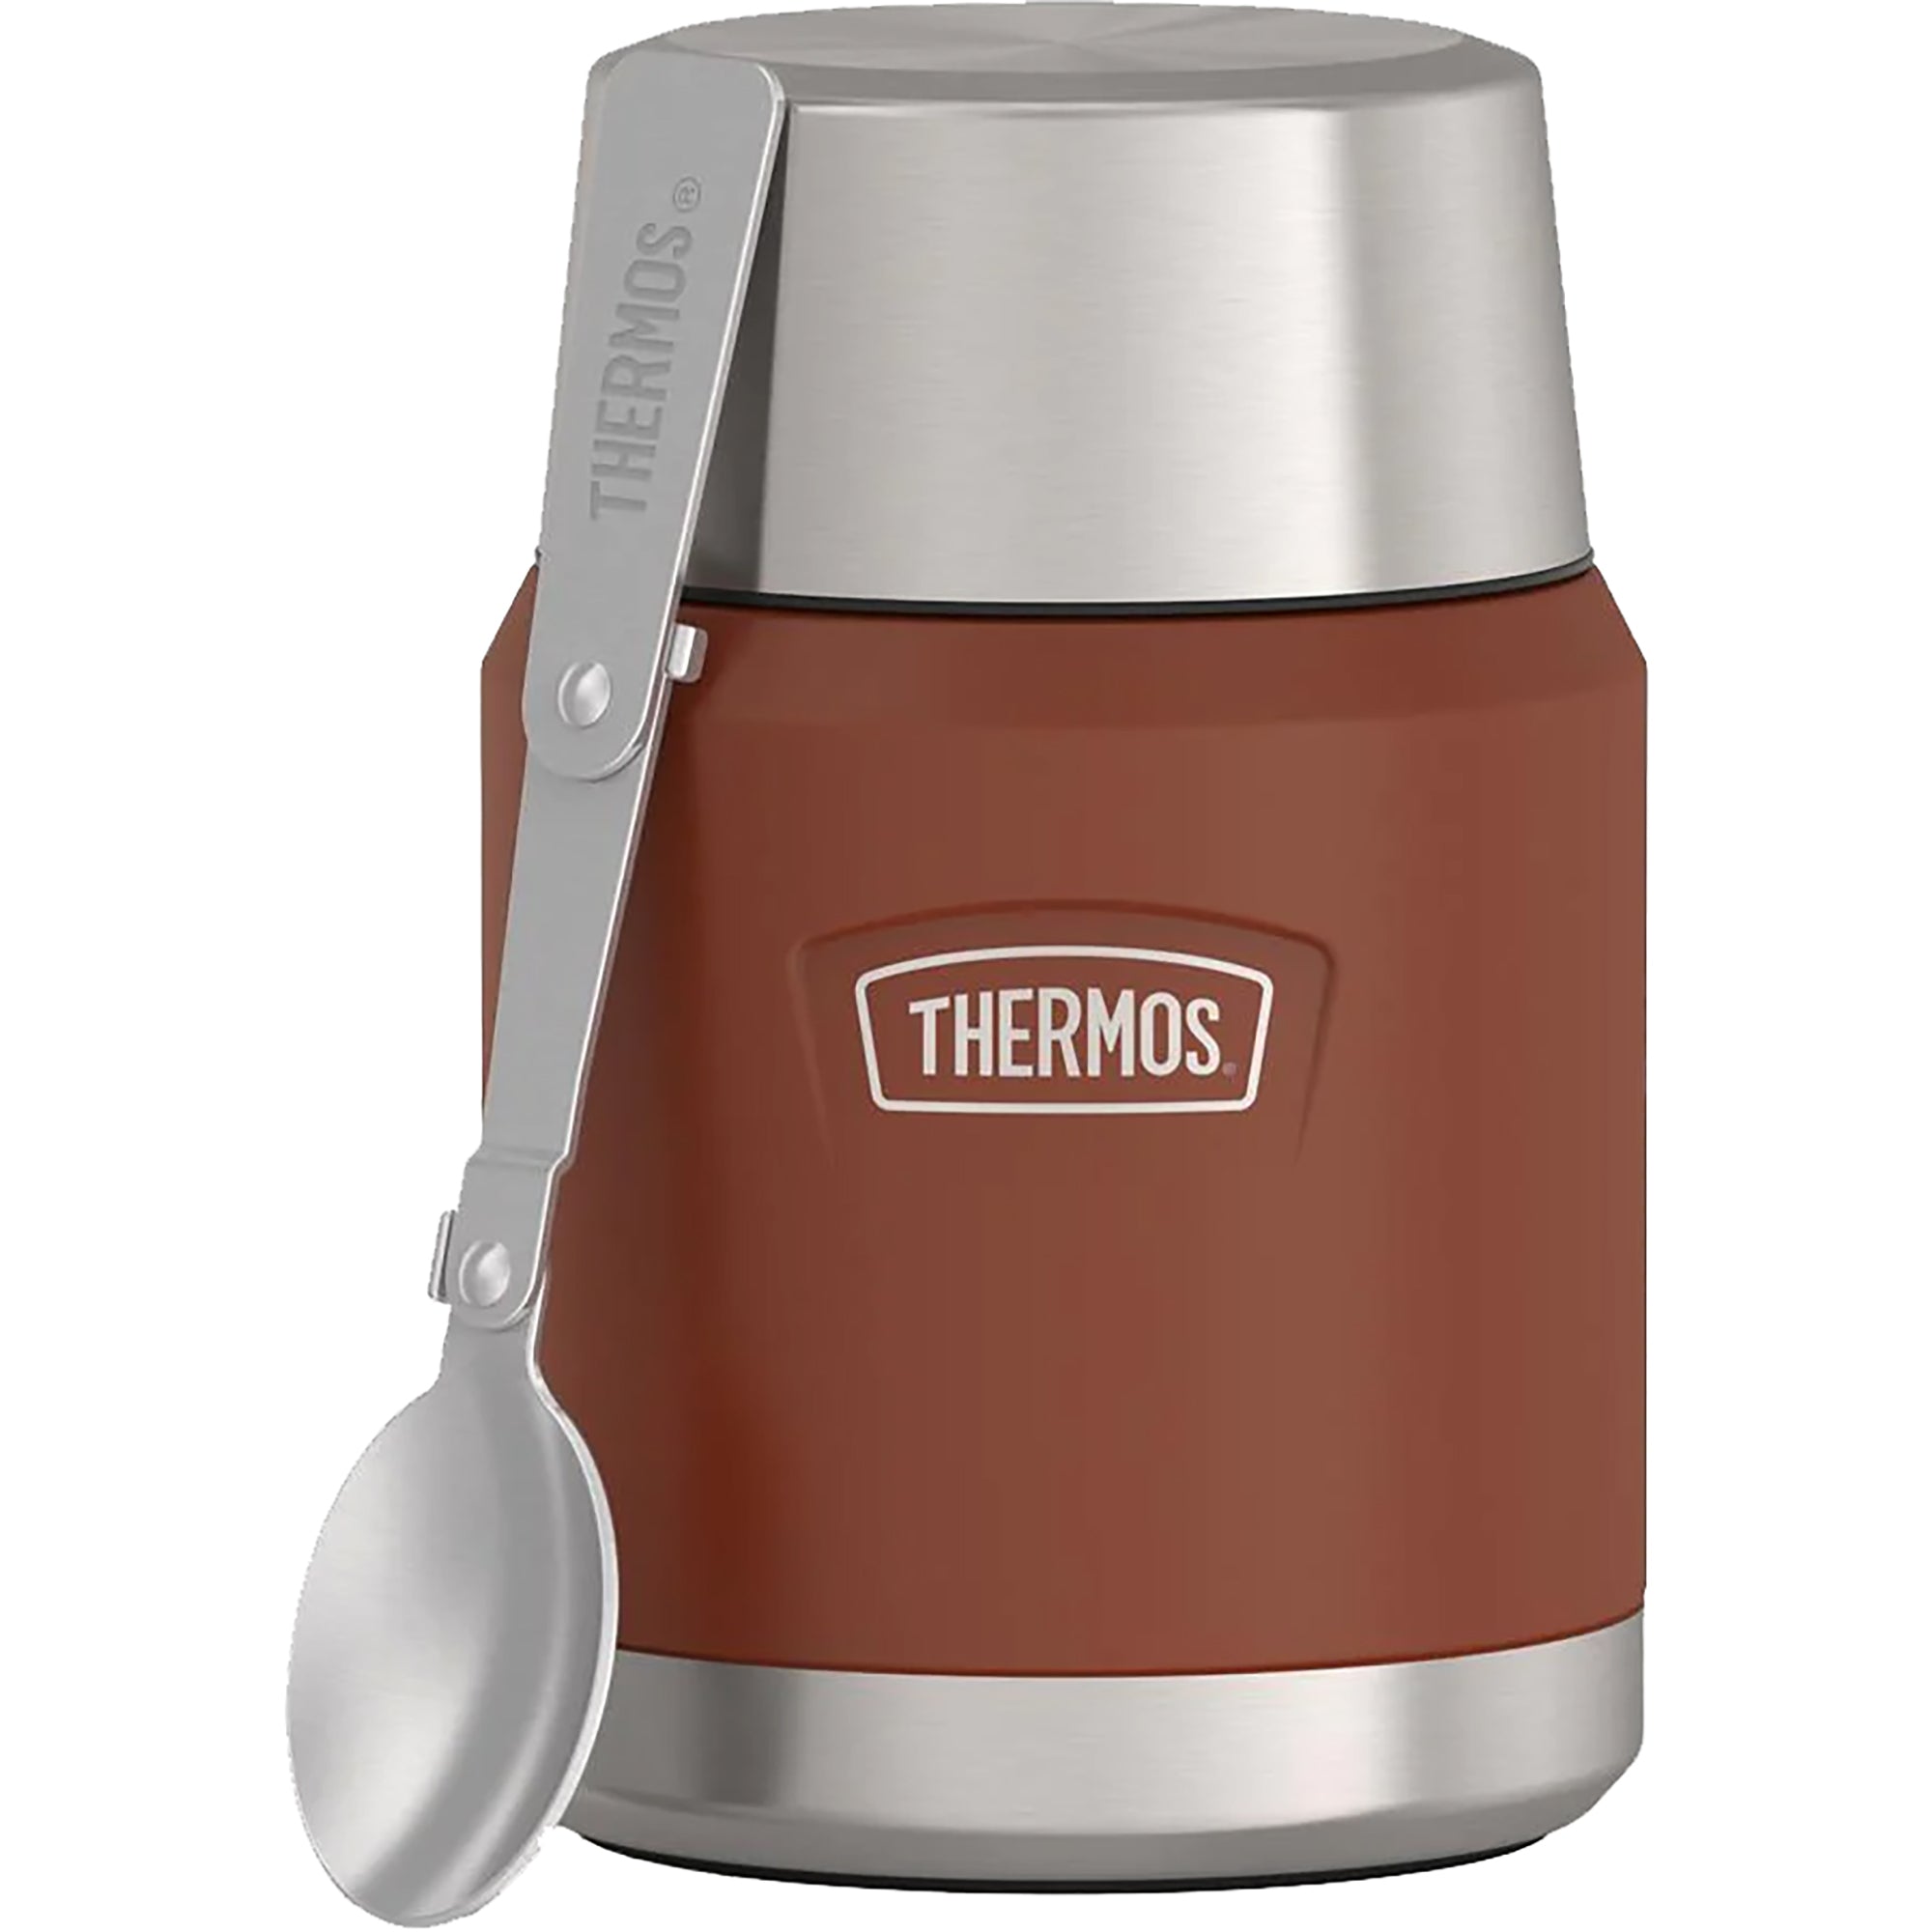 Thermos 16 oz. Icon Vacuum Insulated Stainless Steel Food Jar w/ Spoon Thermos